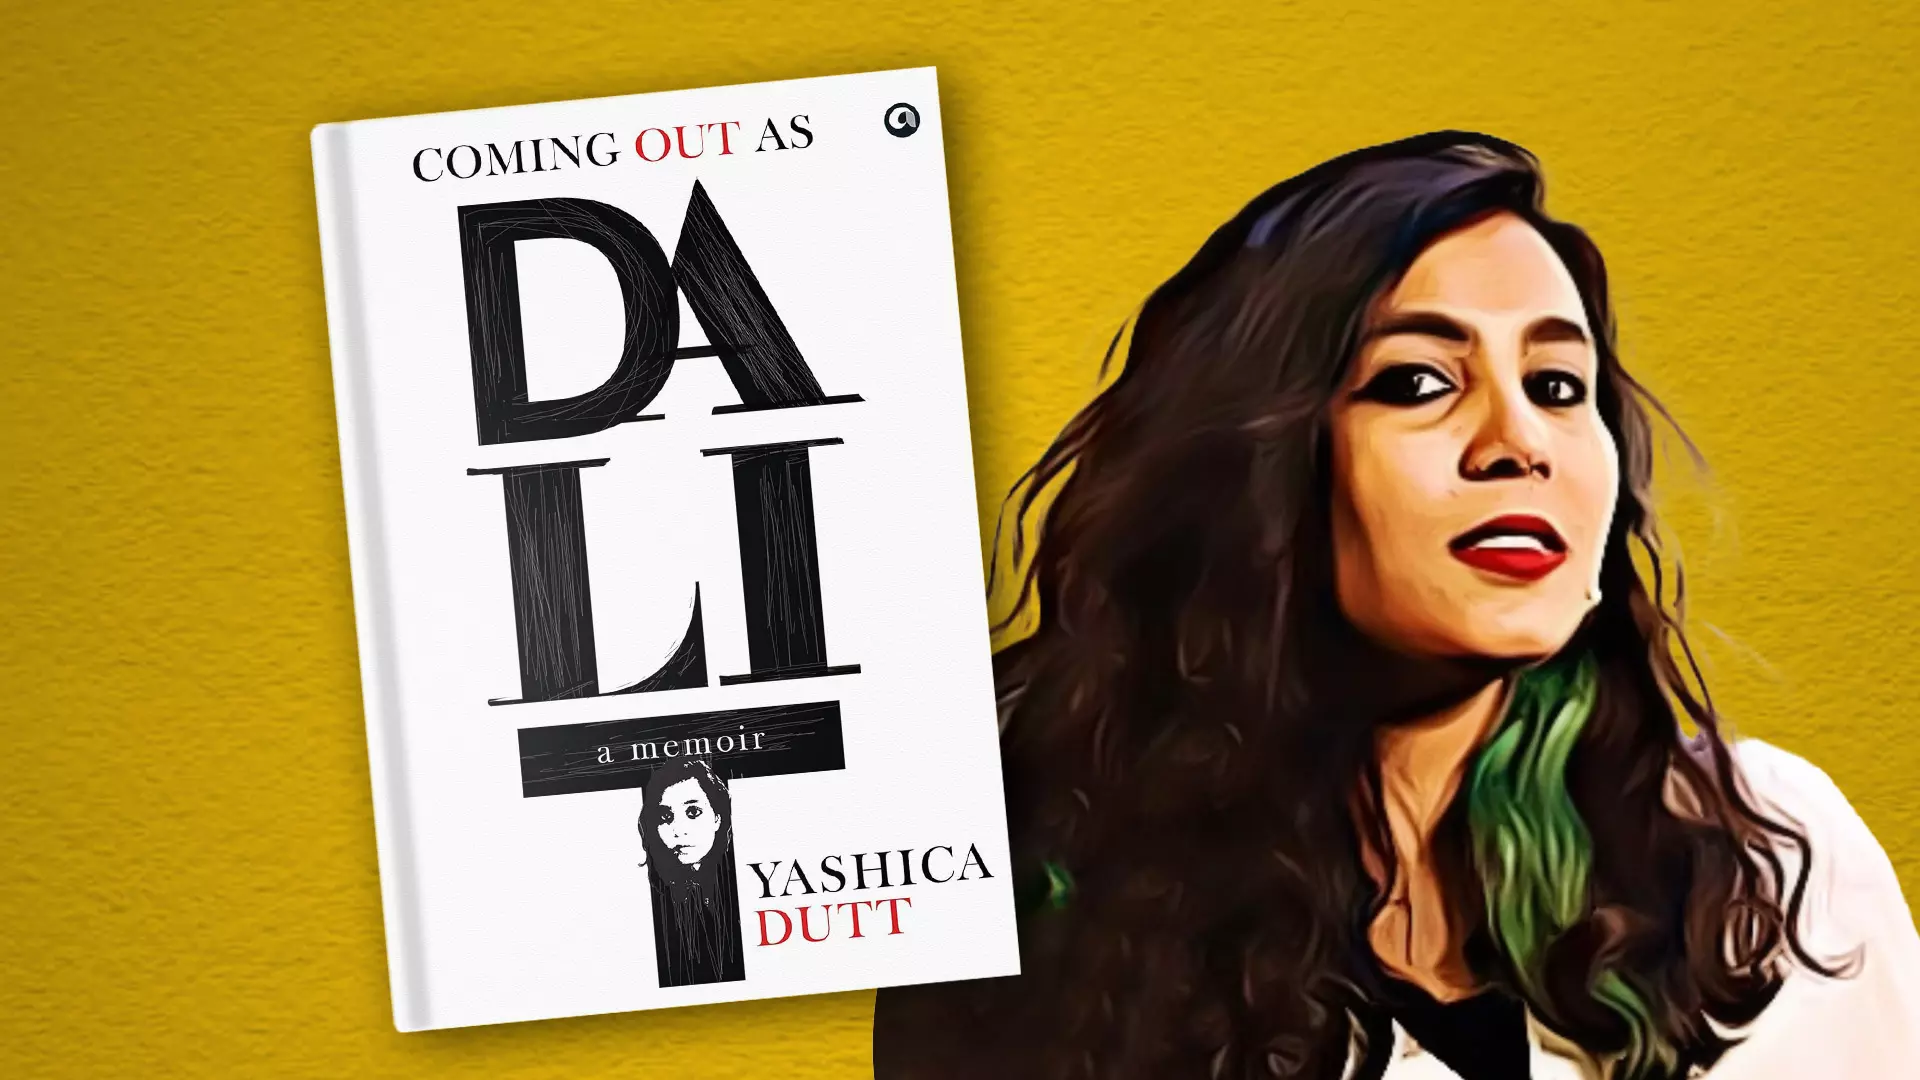 Dalit encapsulates Yashica Dutts personal reckoning with her caste identity.